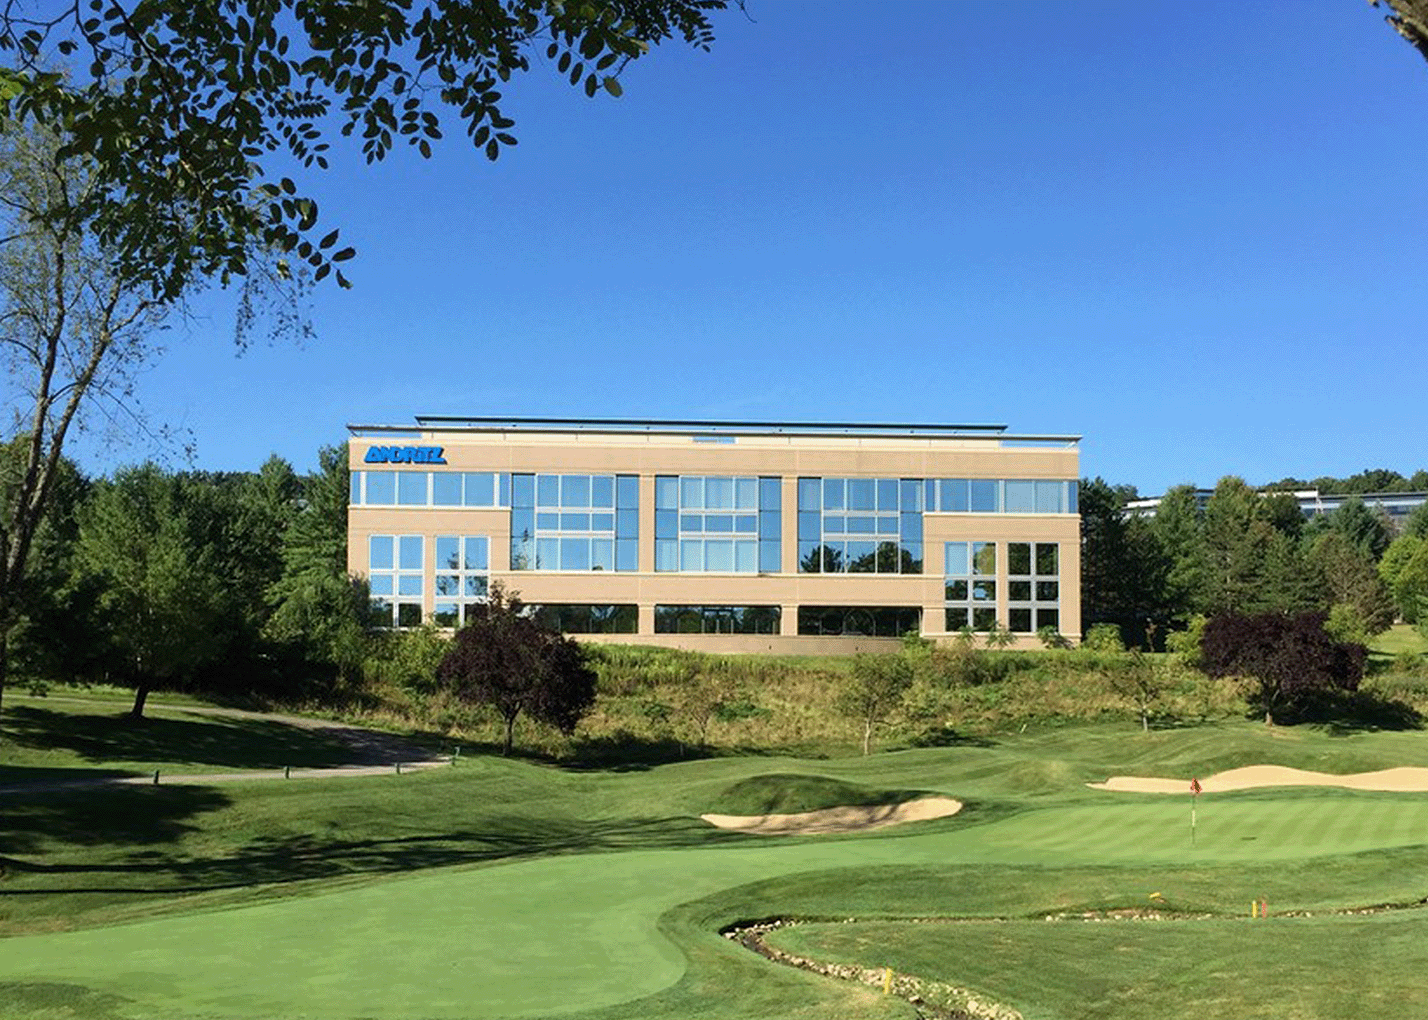 building exterior photo with a golf course in front